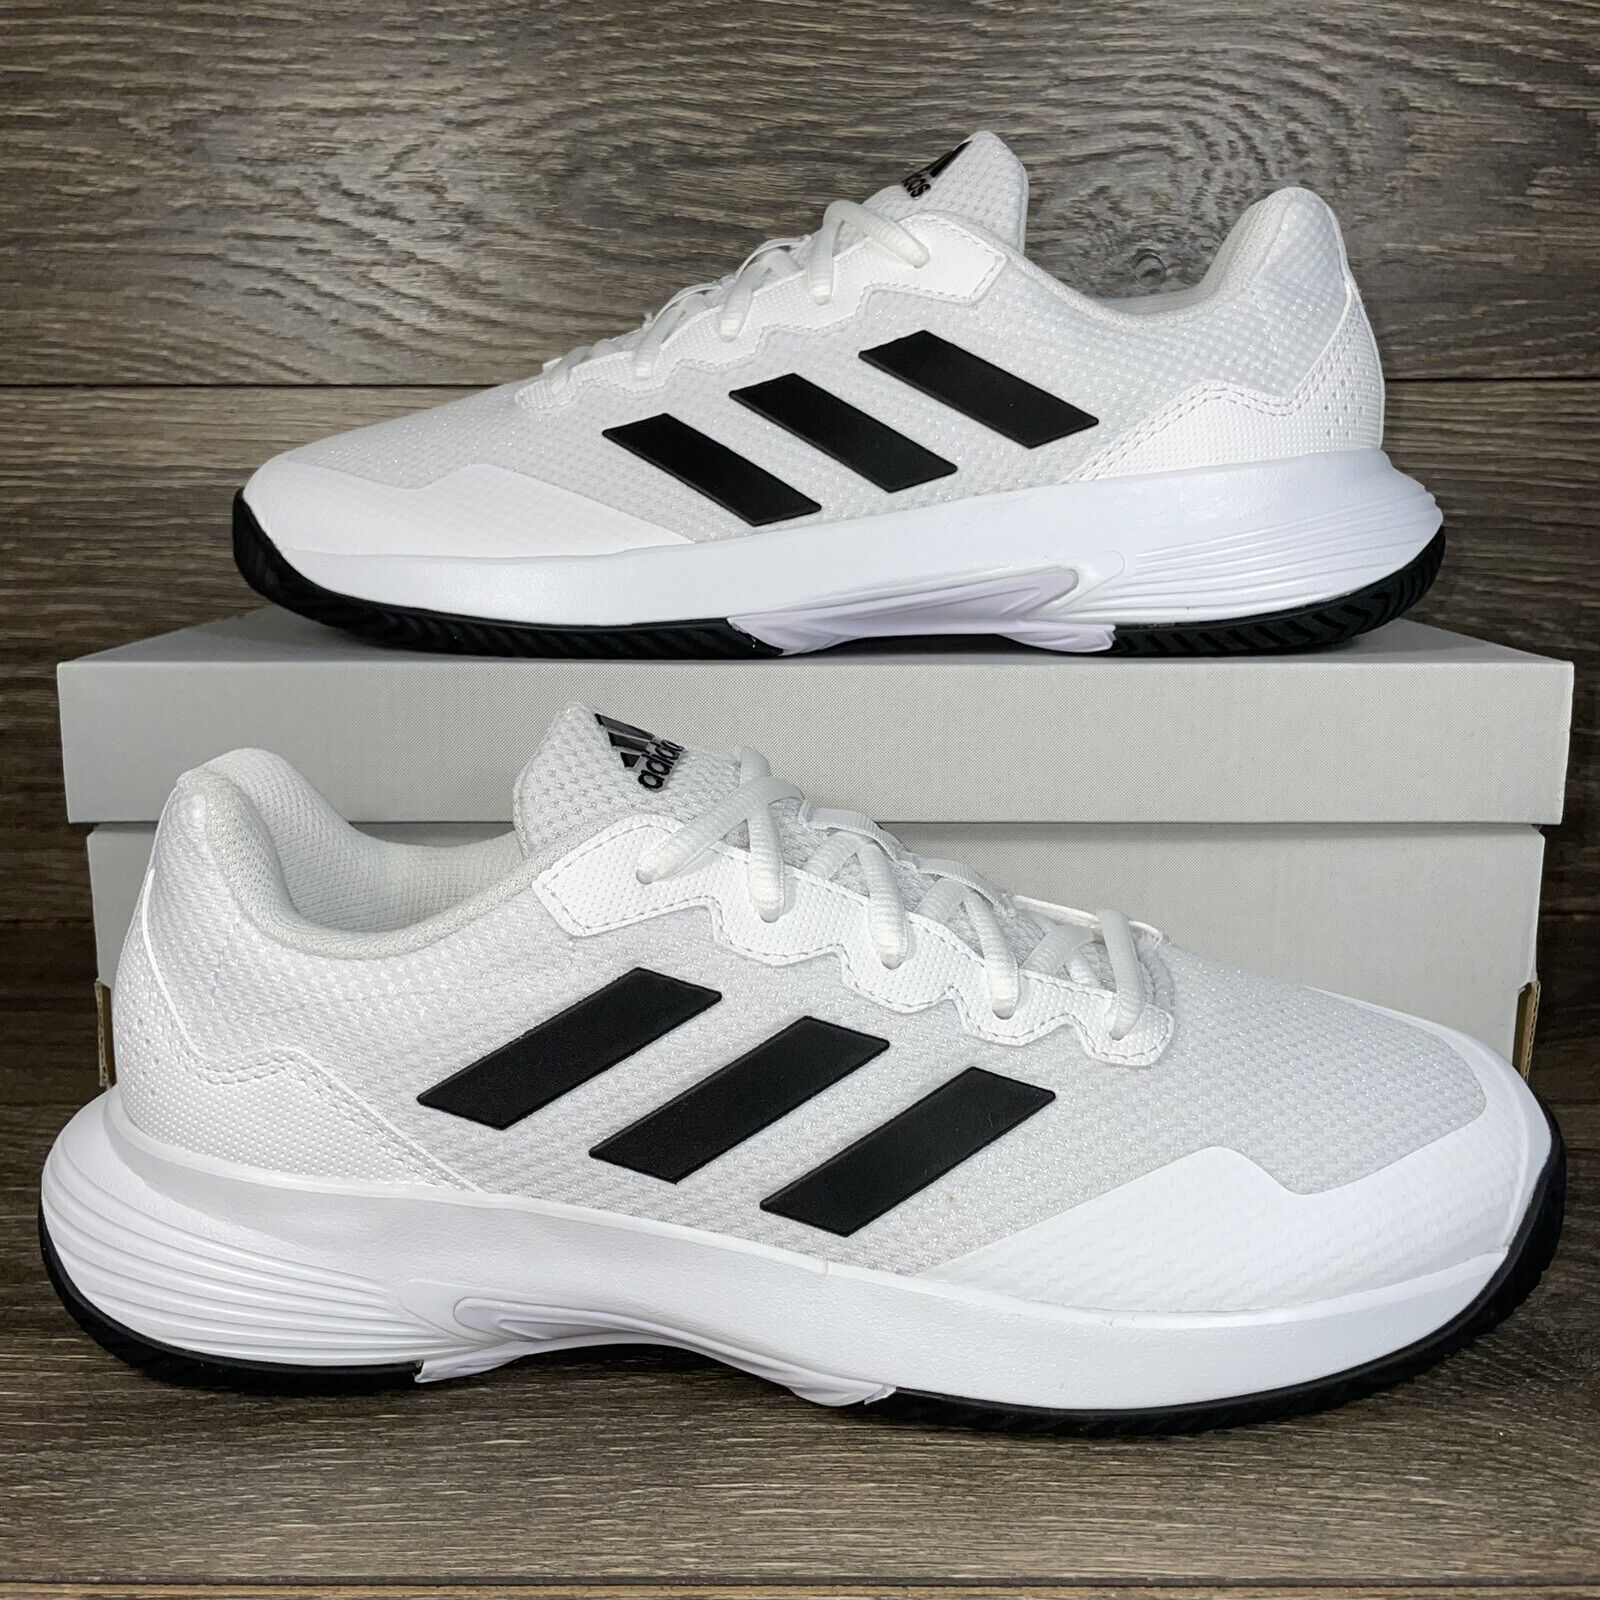 Buy Tennis shoes online | Tennis-Point